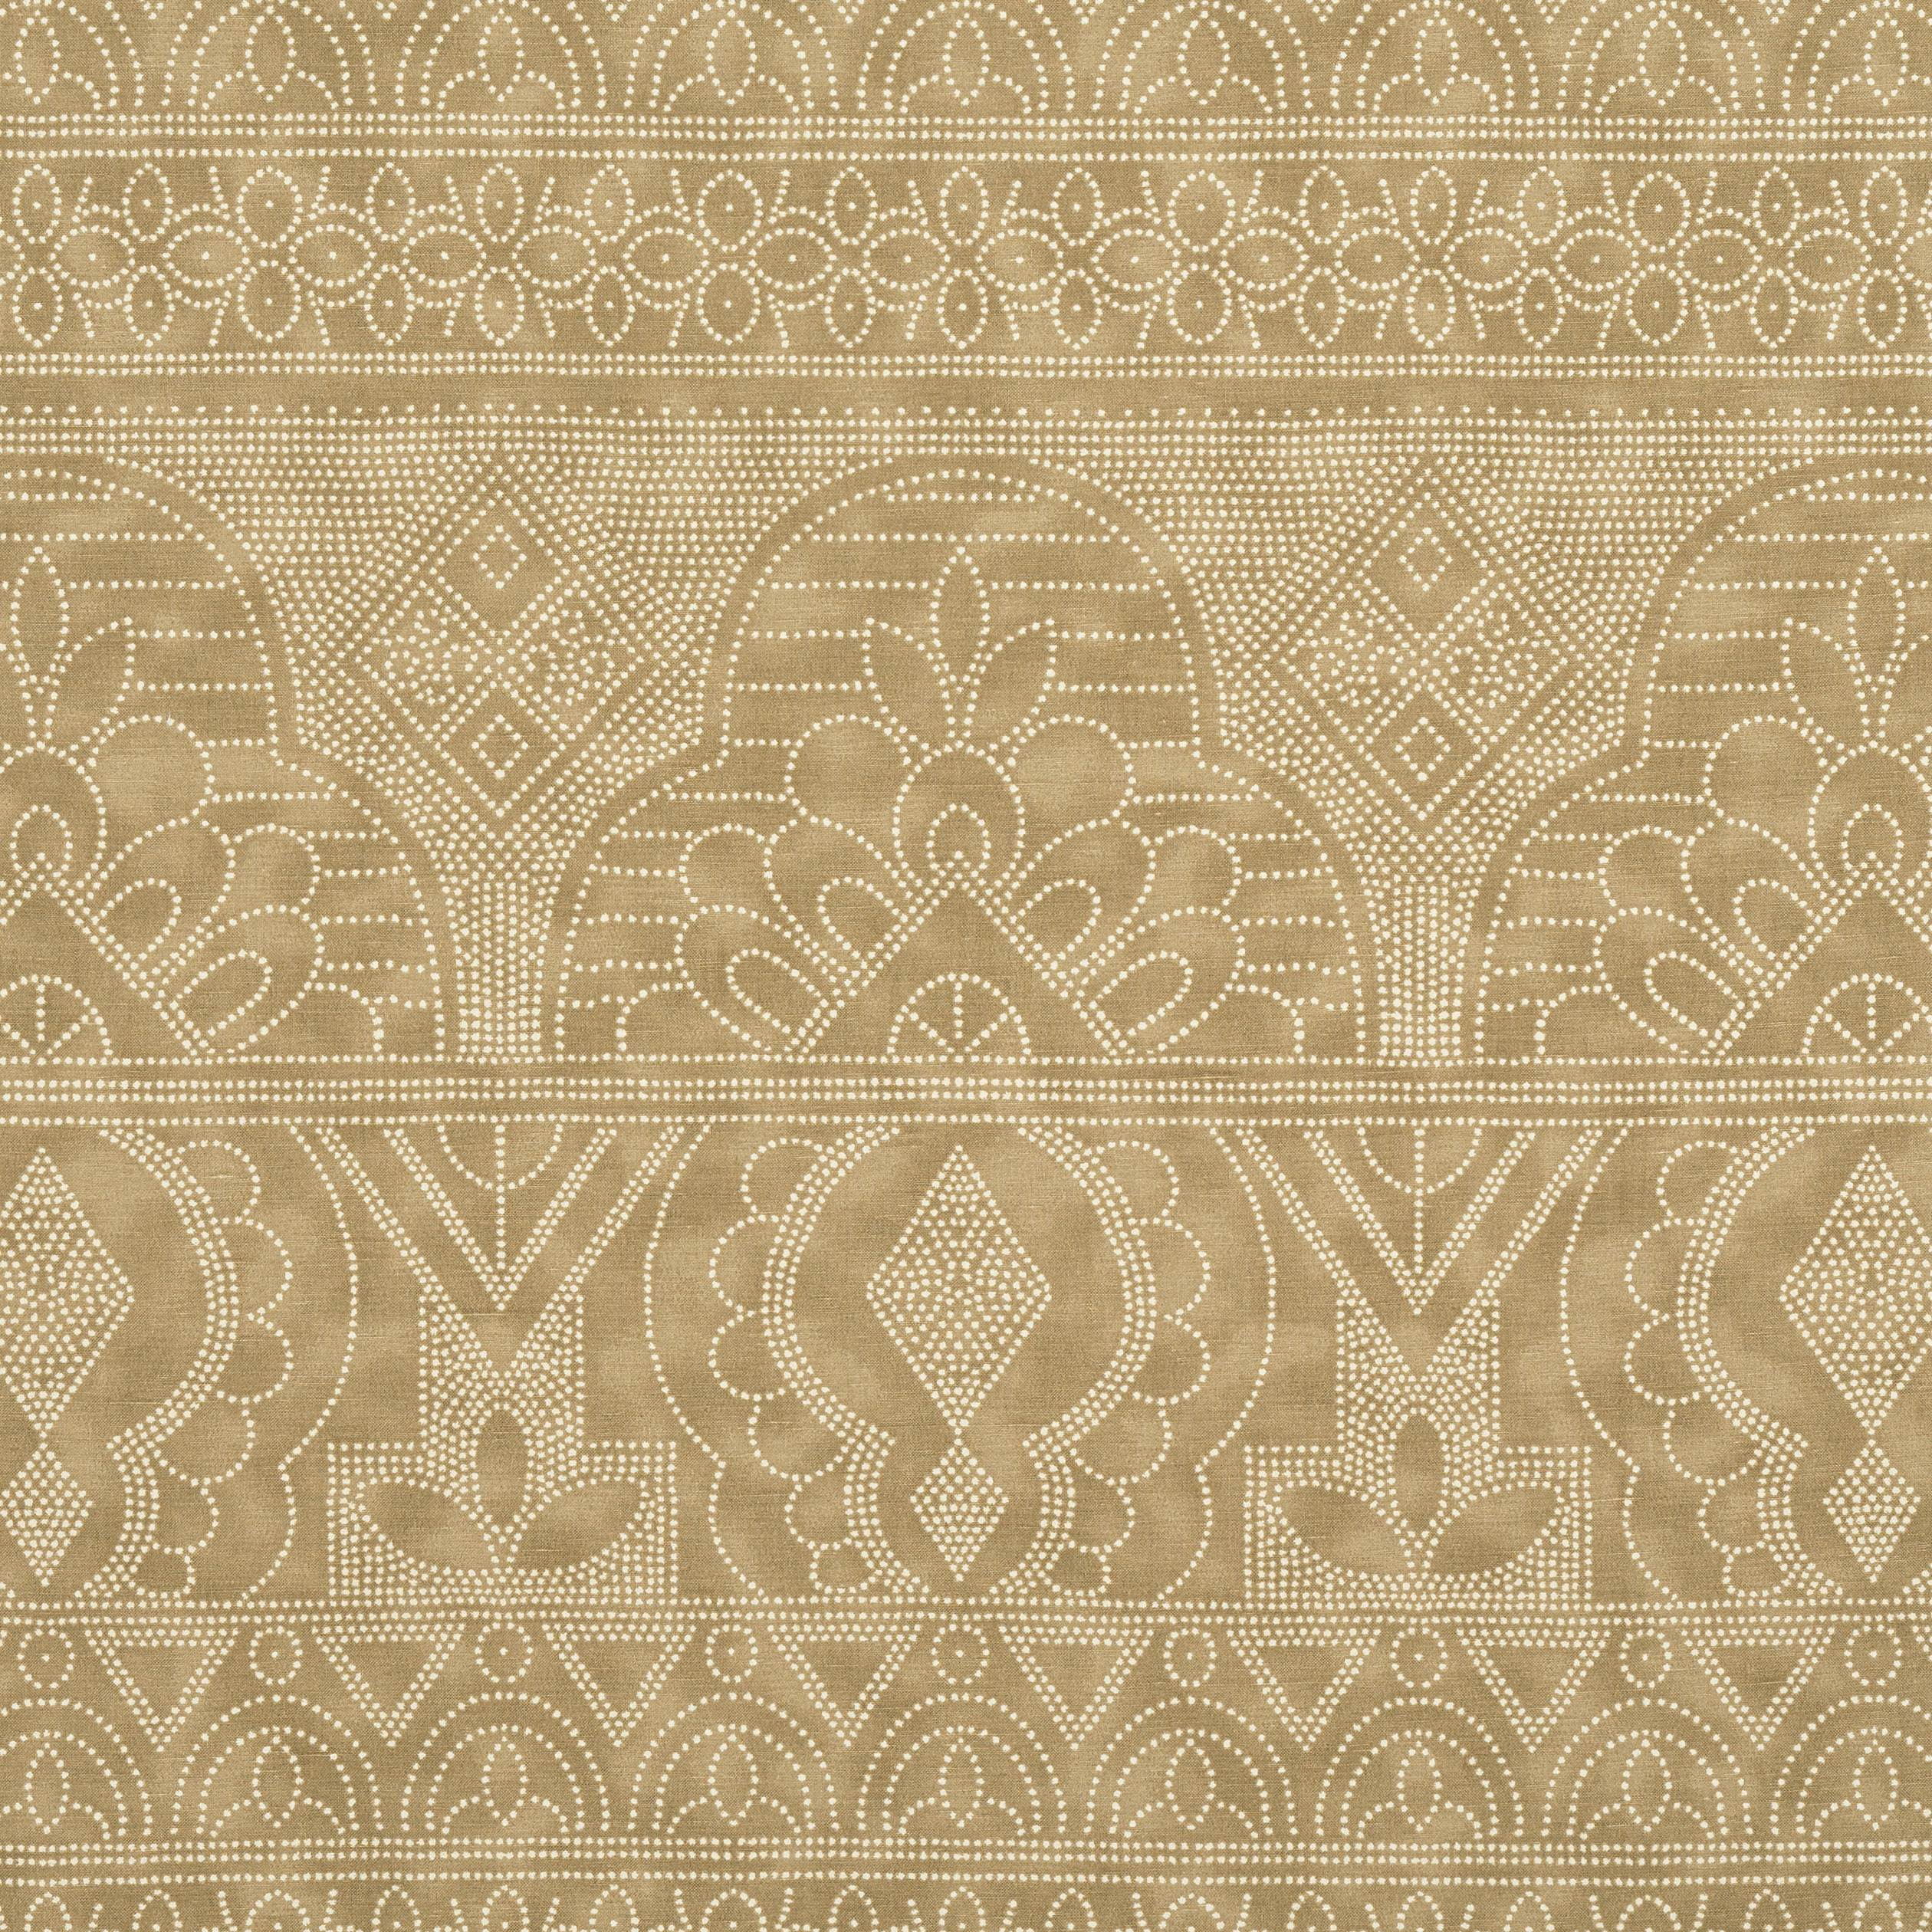 F981301 MEDINAS Printed Thibaut Fabrics collection Montecito from Camel the